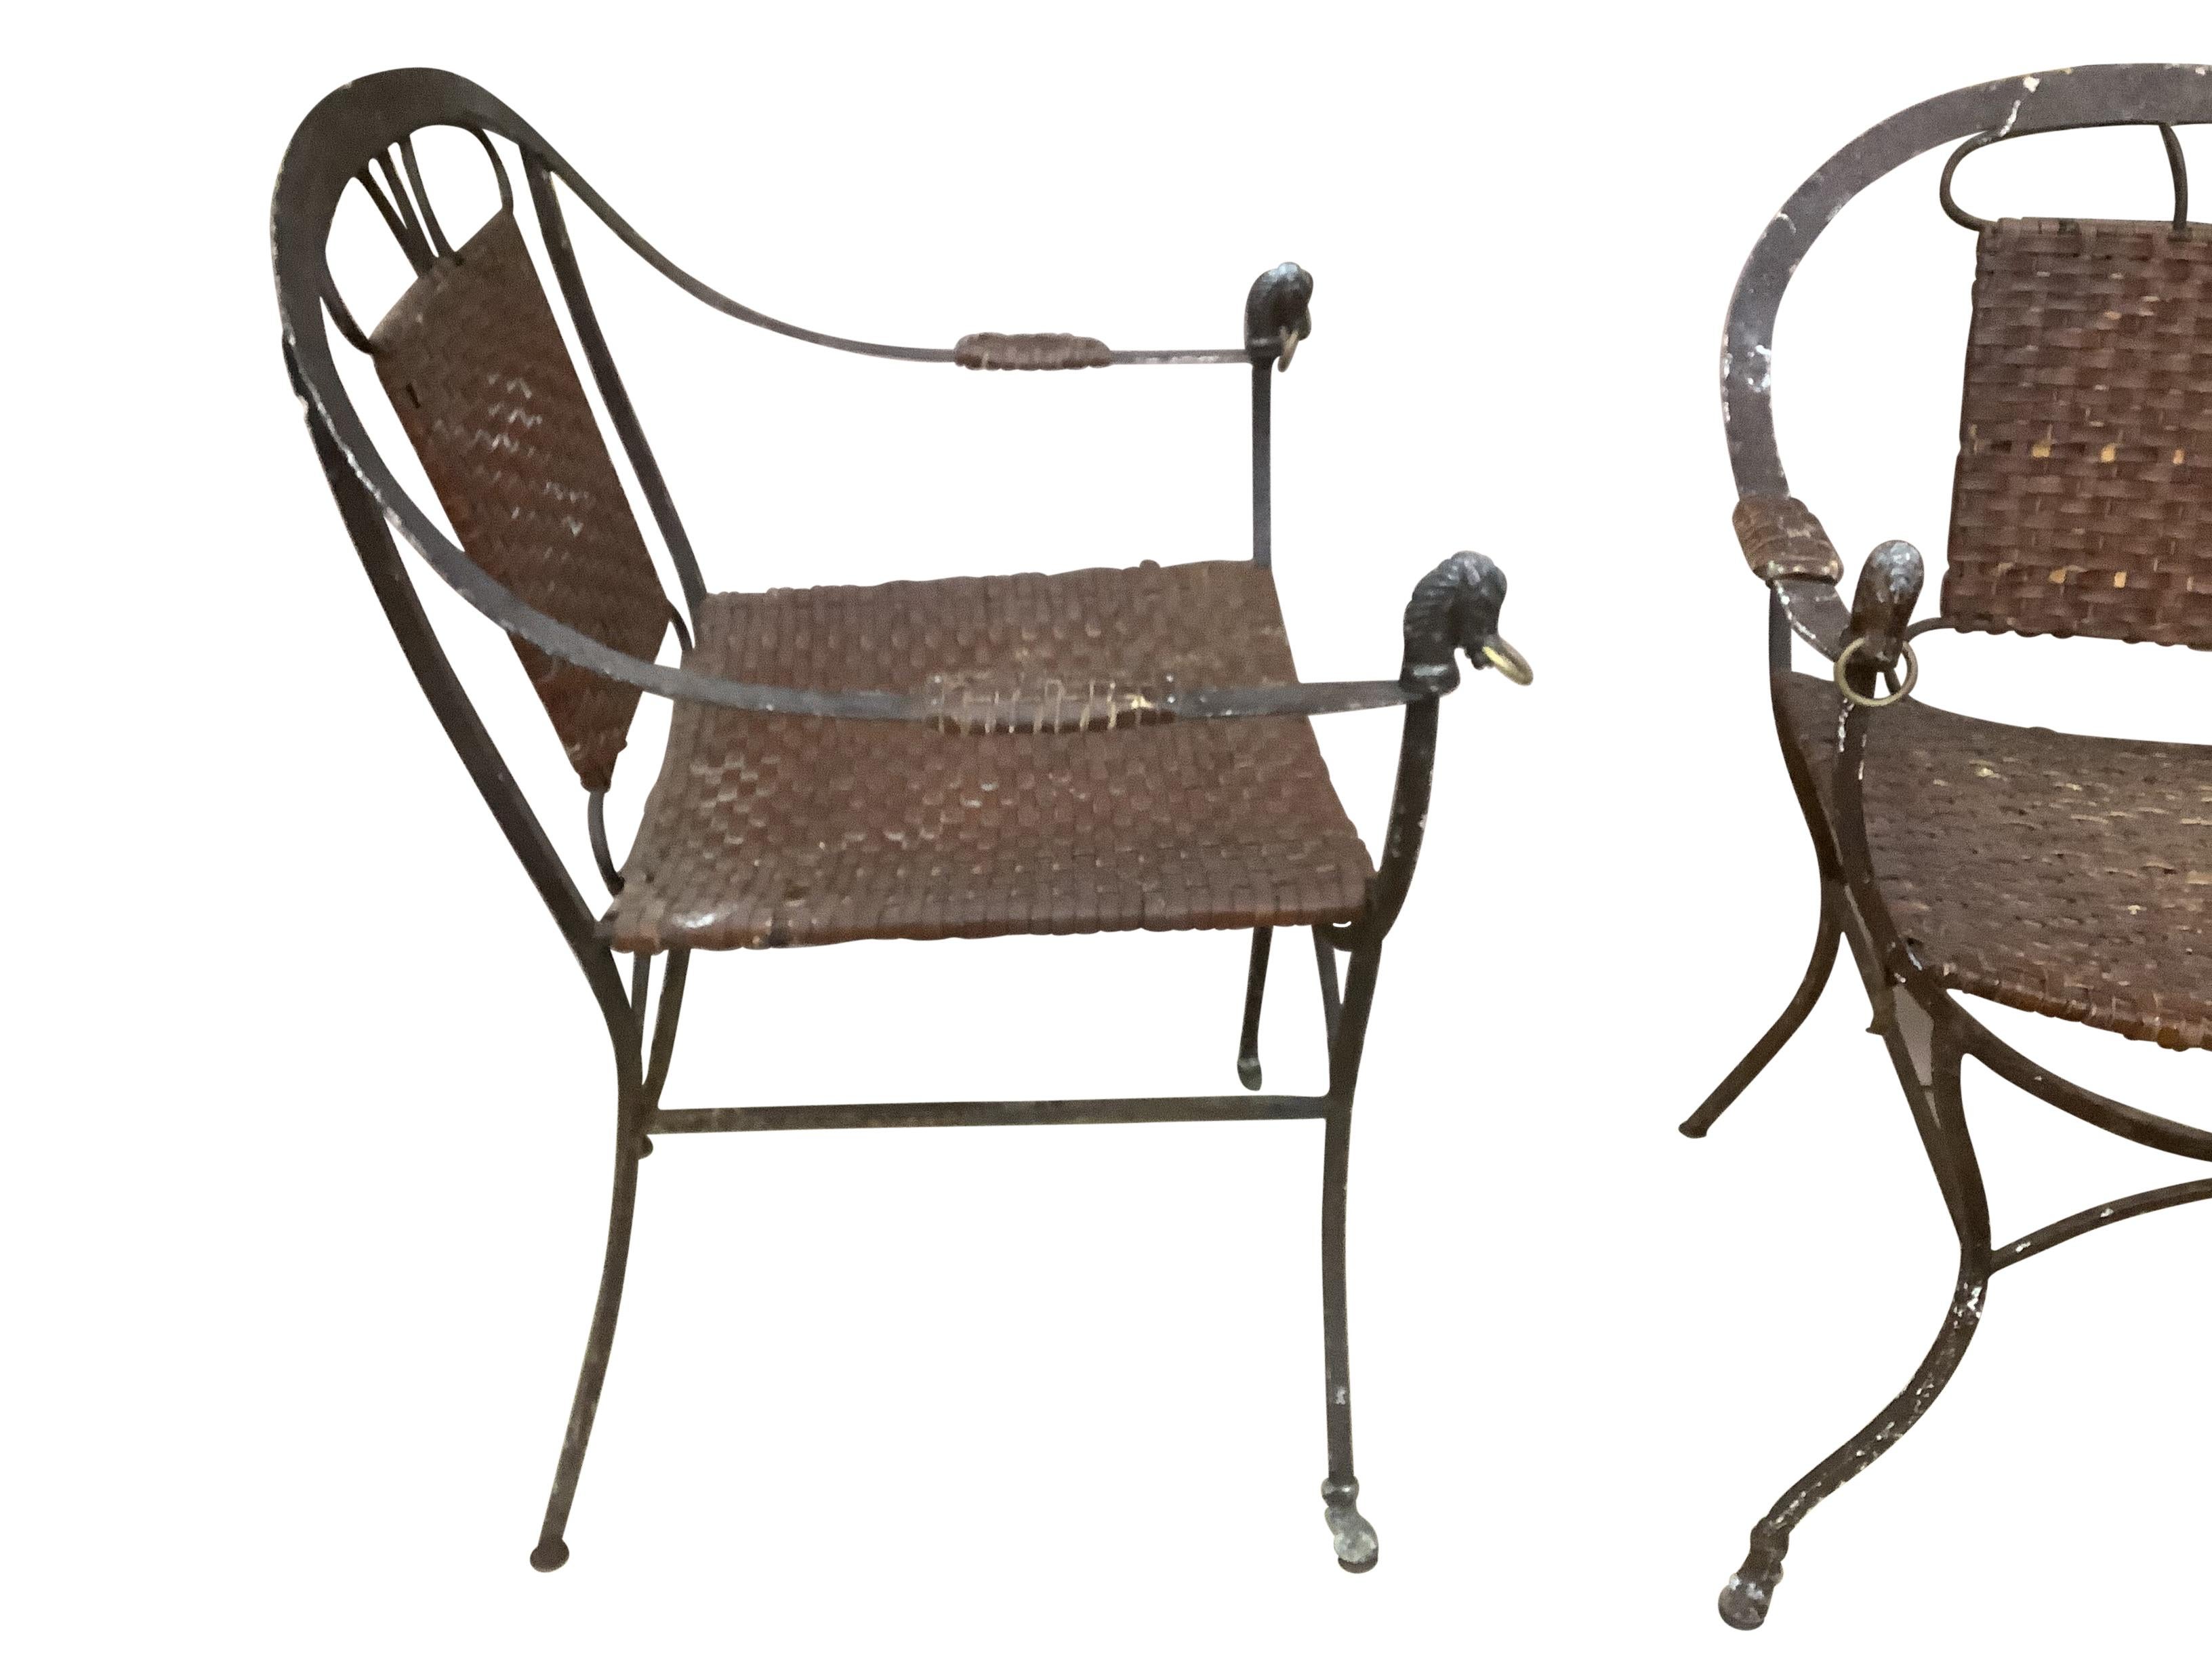 Pair of Iron Horseshoe Back and Leather Chairs. Hand hammered iron in an antique brown finish. Seats and arm rests arm are in leather in a woven webbed design. Arm terminate with a stylized horse head with a brass ring. The legs of the chairs shade